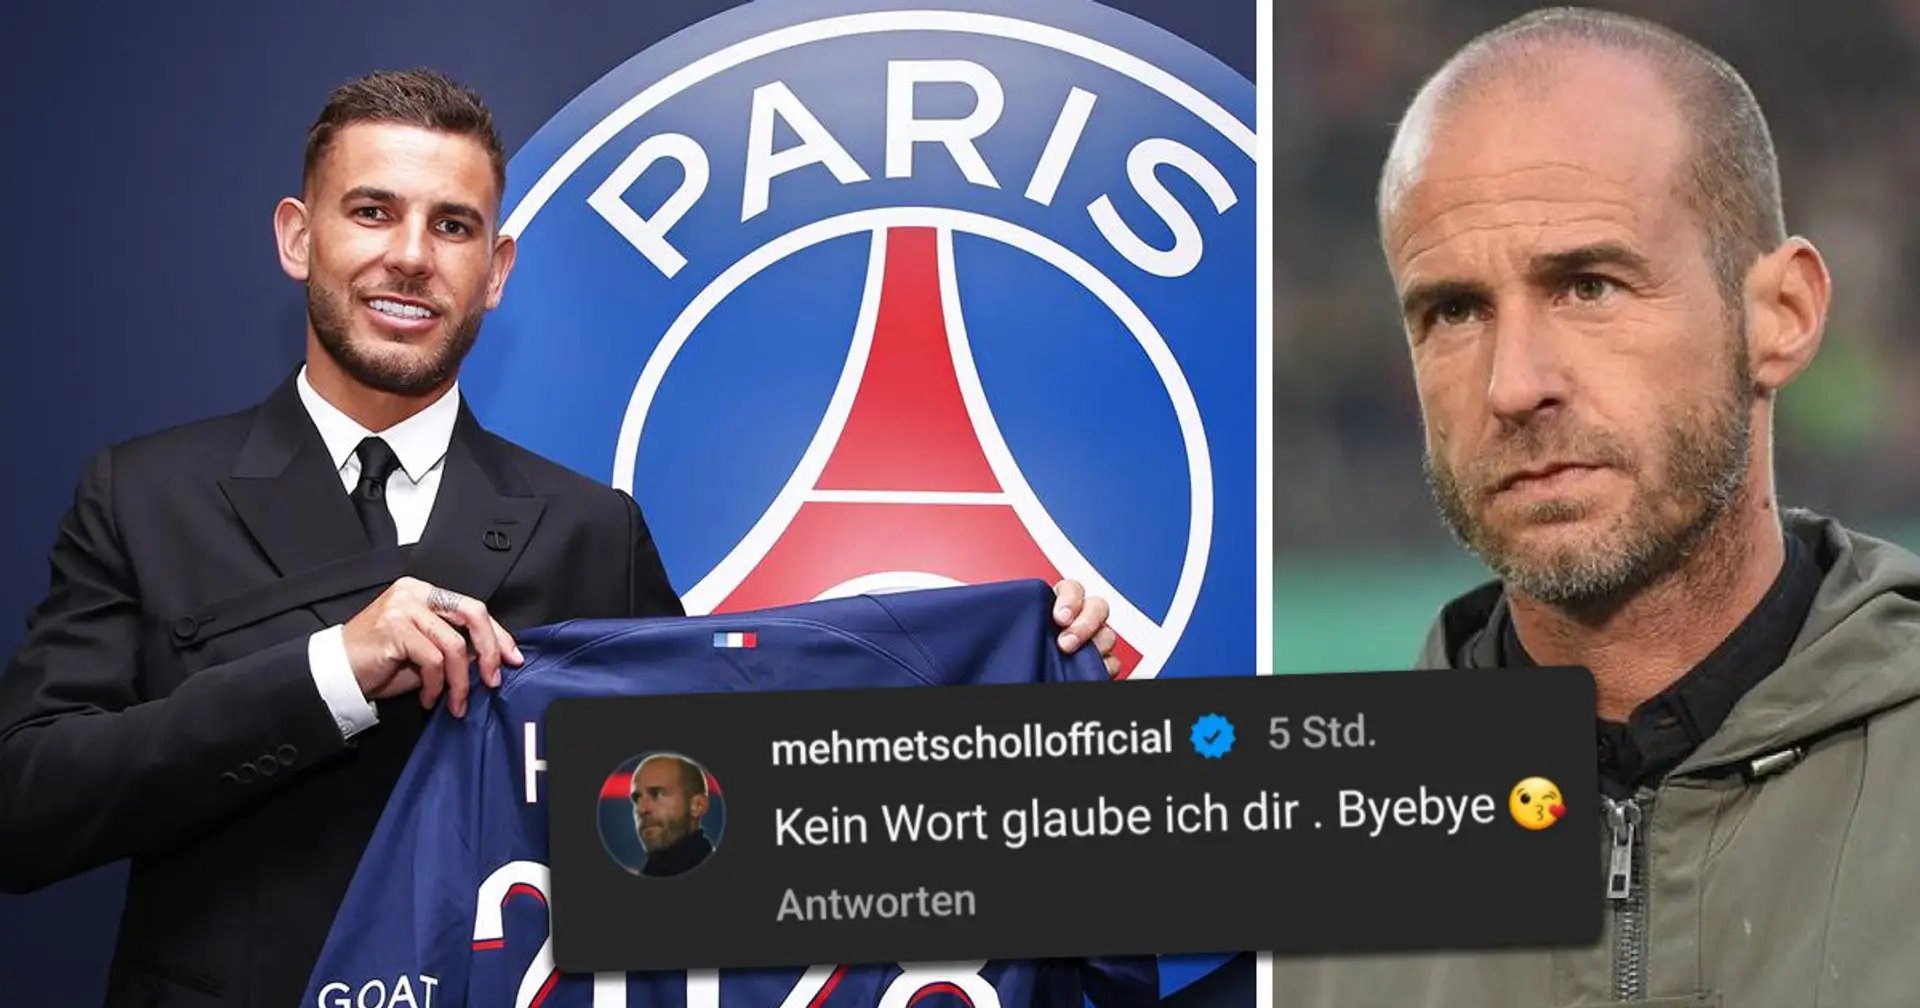 "I don’t believe a word you say": Bayern legend Mehmet Schnoll slams PSG new signing Lucas Hernandez on farewell post